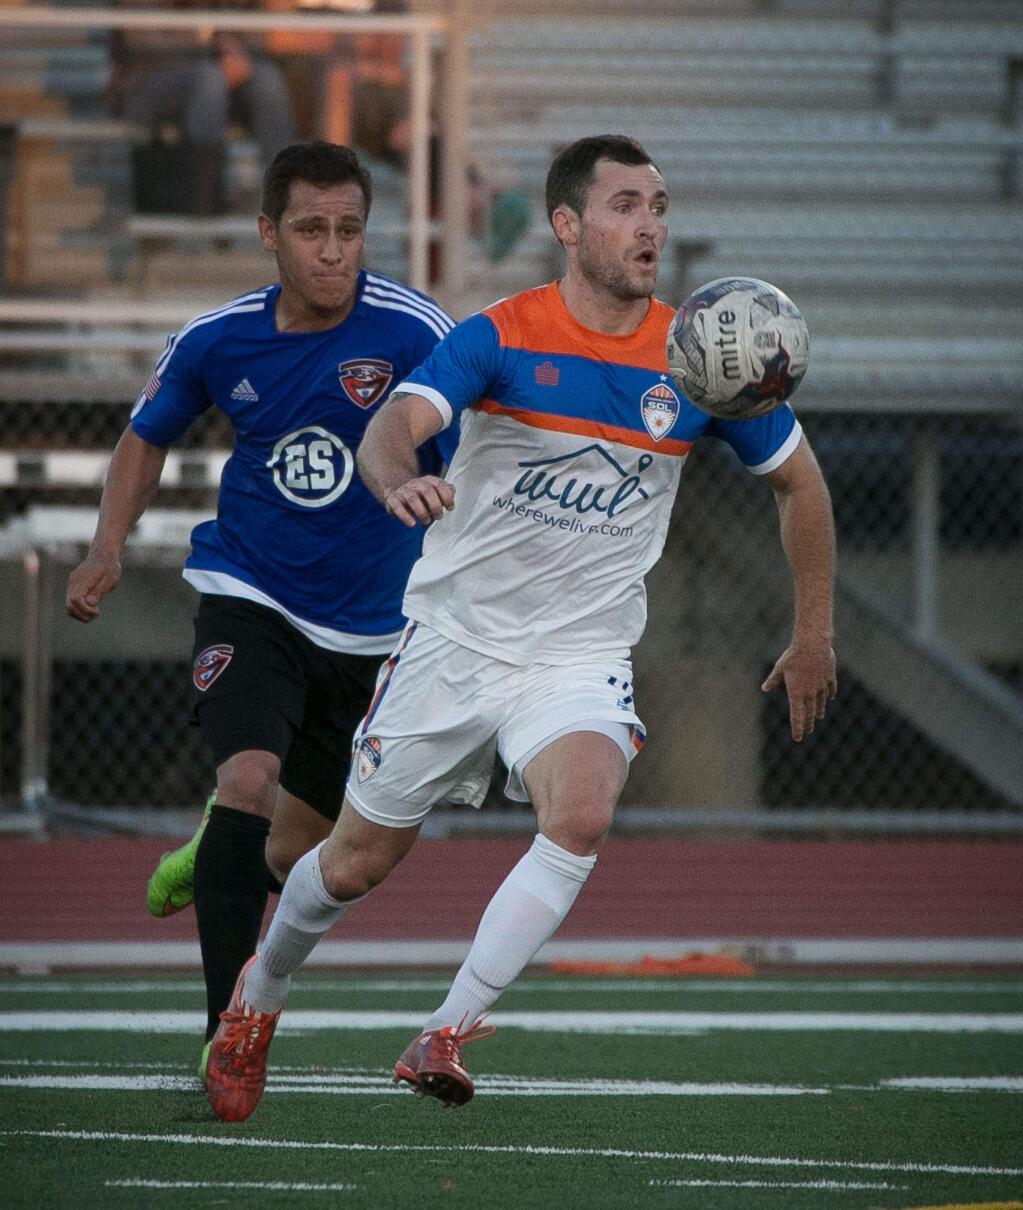 Sonoma County's Simon Wheatley takes the ball around a CD Aguiluchos defender during their National Premier Soccer League regional semifinal playoff match at Santa Rosa High School in Santa Rosa, Saturday, July 18, 2015. (Jeremy Portje / for The Press Democrat)